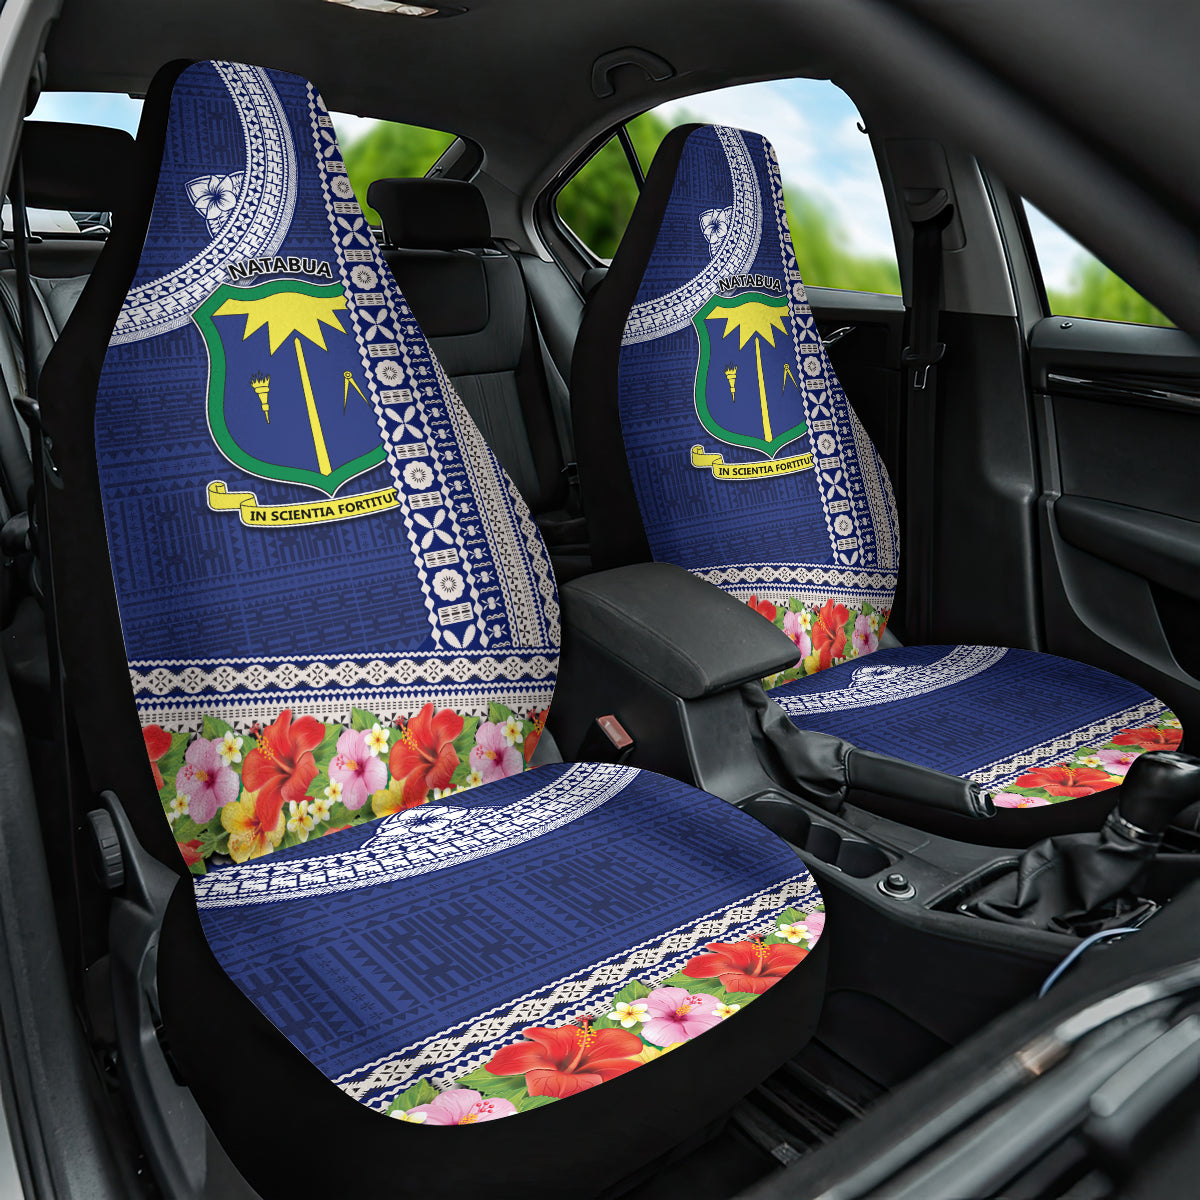 Fiji Natabua High School Car Seat Cover Tropical Flower and Tapa Pattern Blue Style LT03 One Size Blue - Polynesian Pride